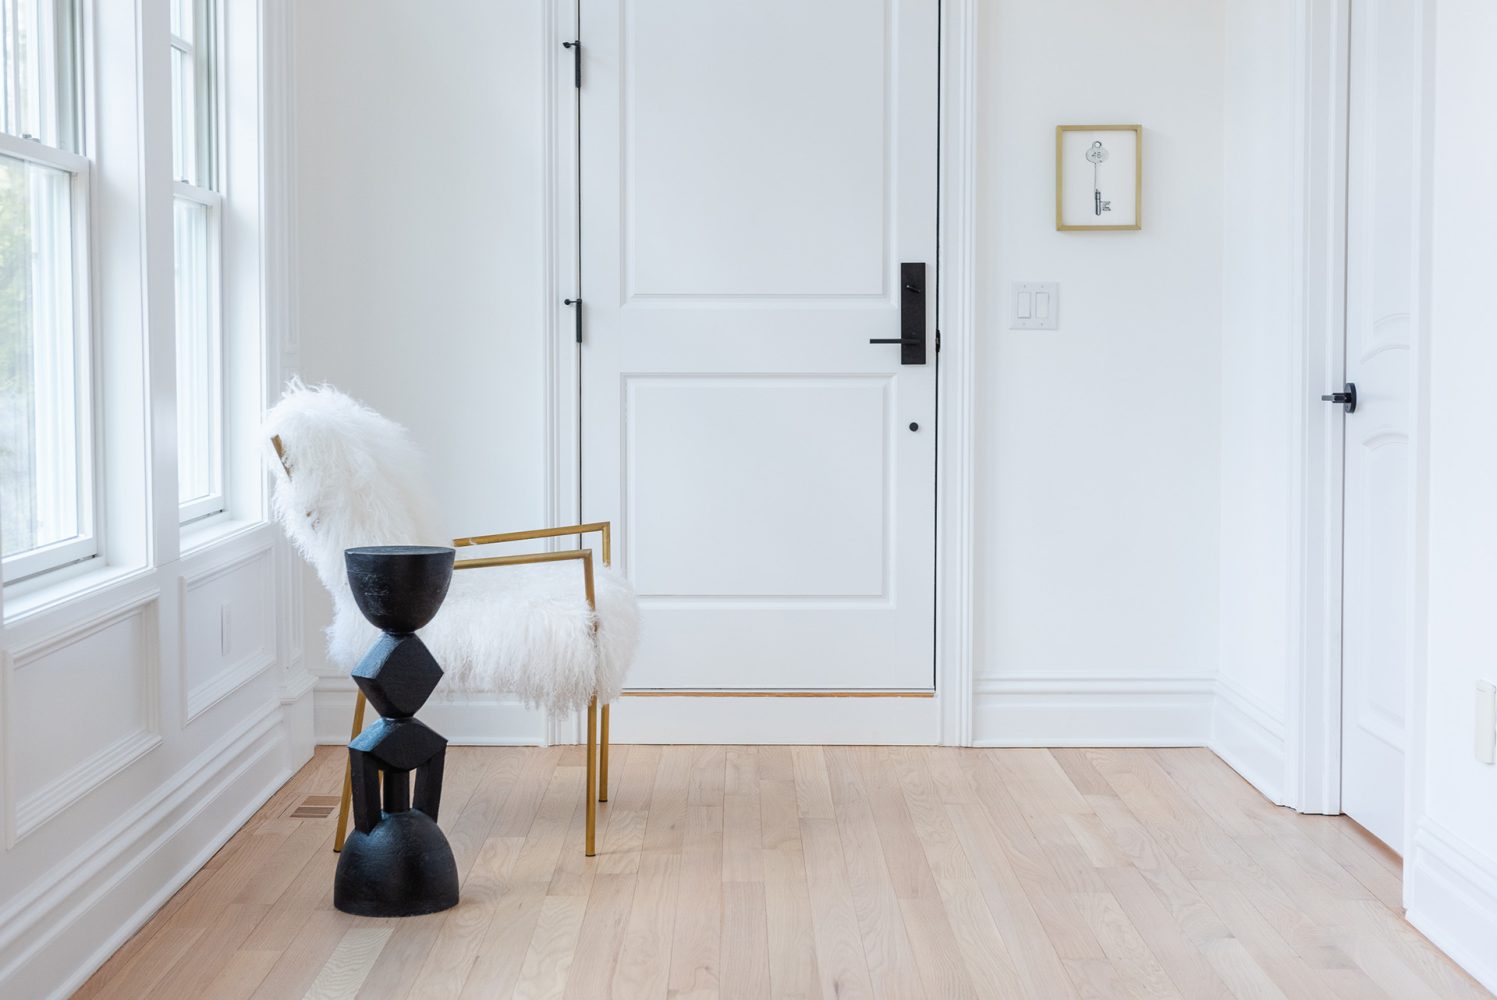 A hallway with white walls and light wooden floors. A brass chair with fuzzy white upholstery is set in the corner, next to a sculptural black side-table-height form.